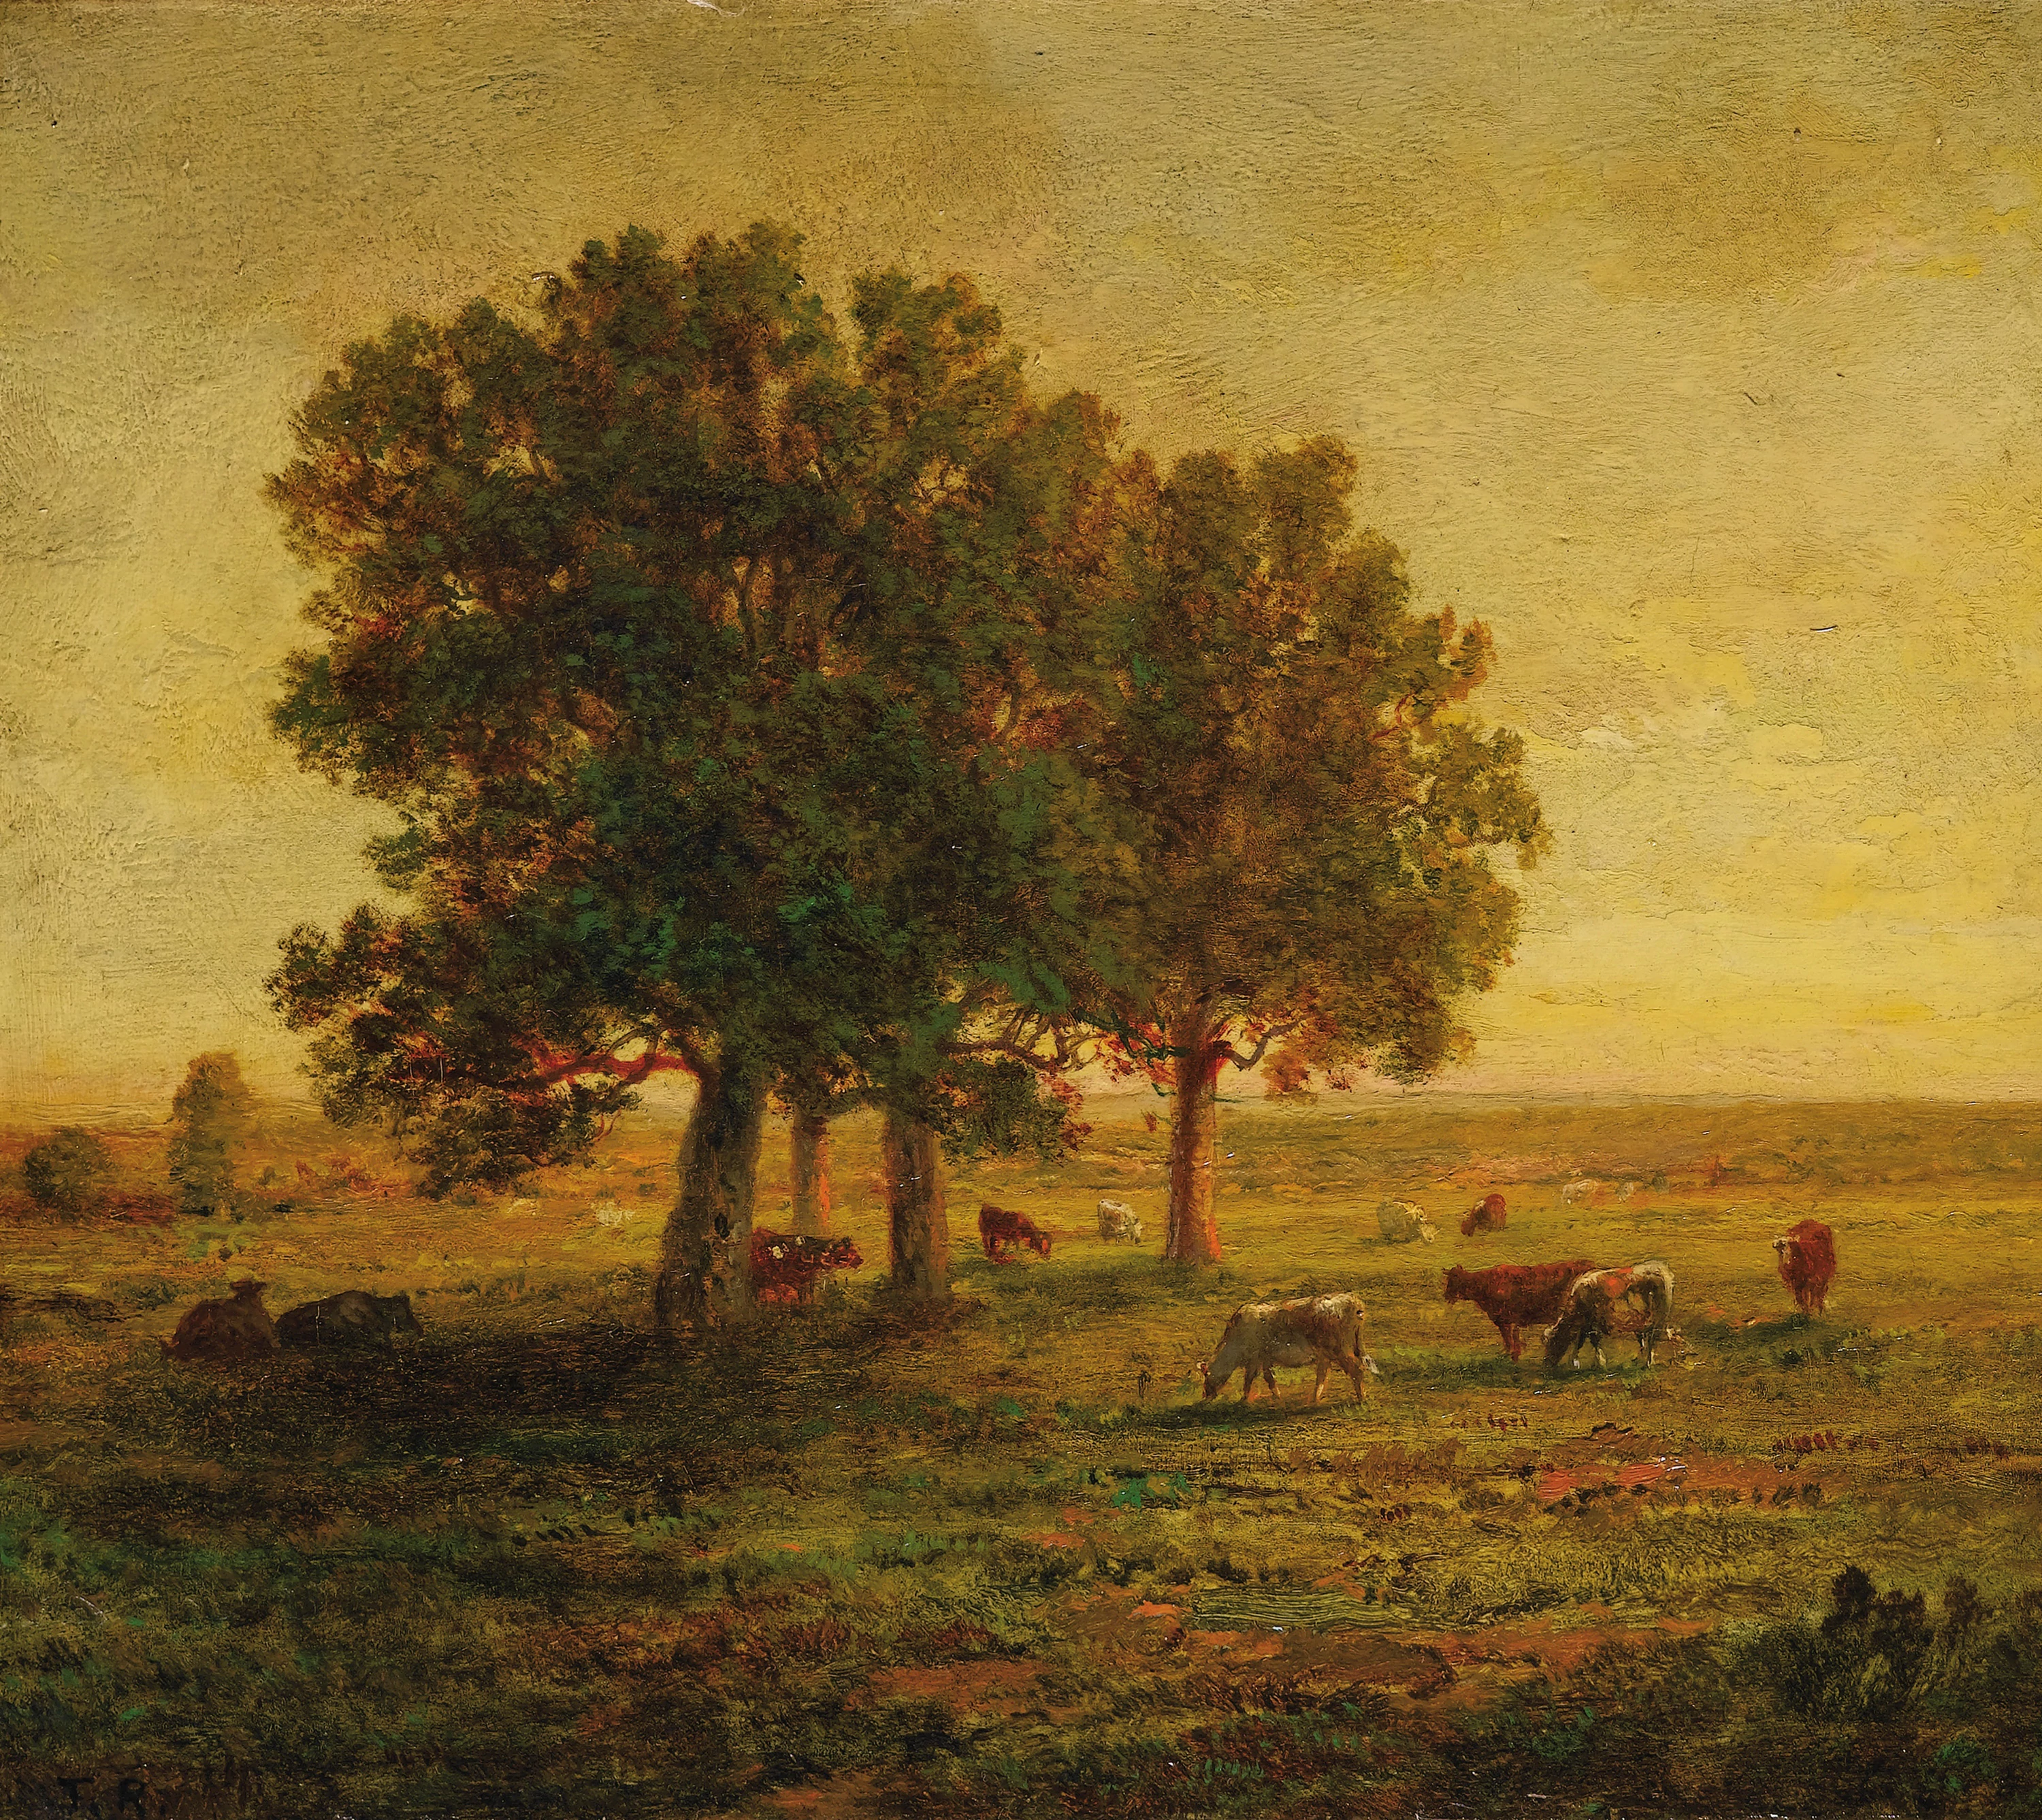 Cows in a Group of Oak Trees, Apremont, Théodore Rousseau